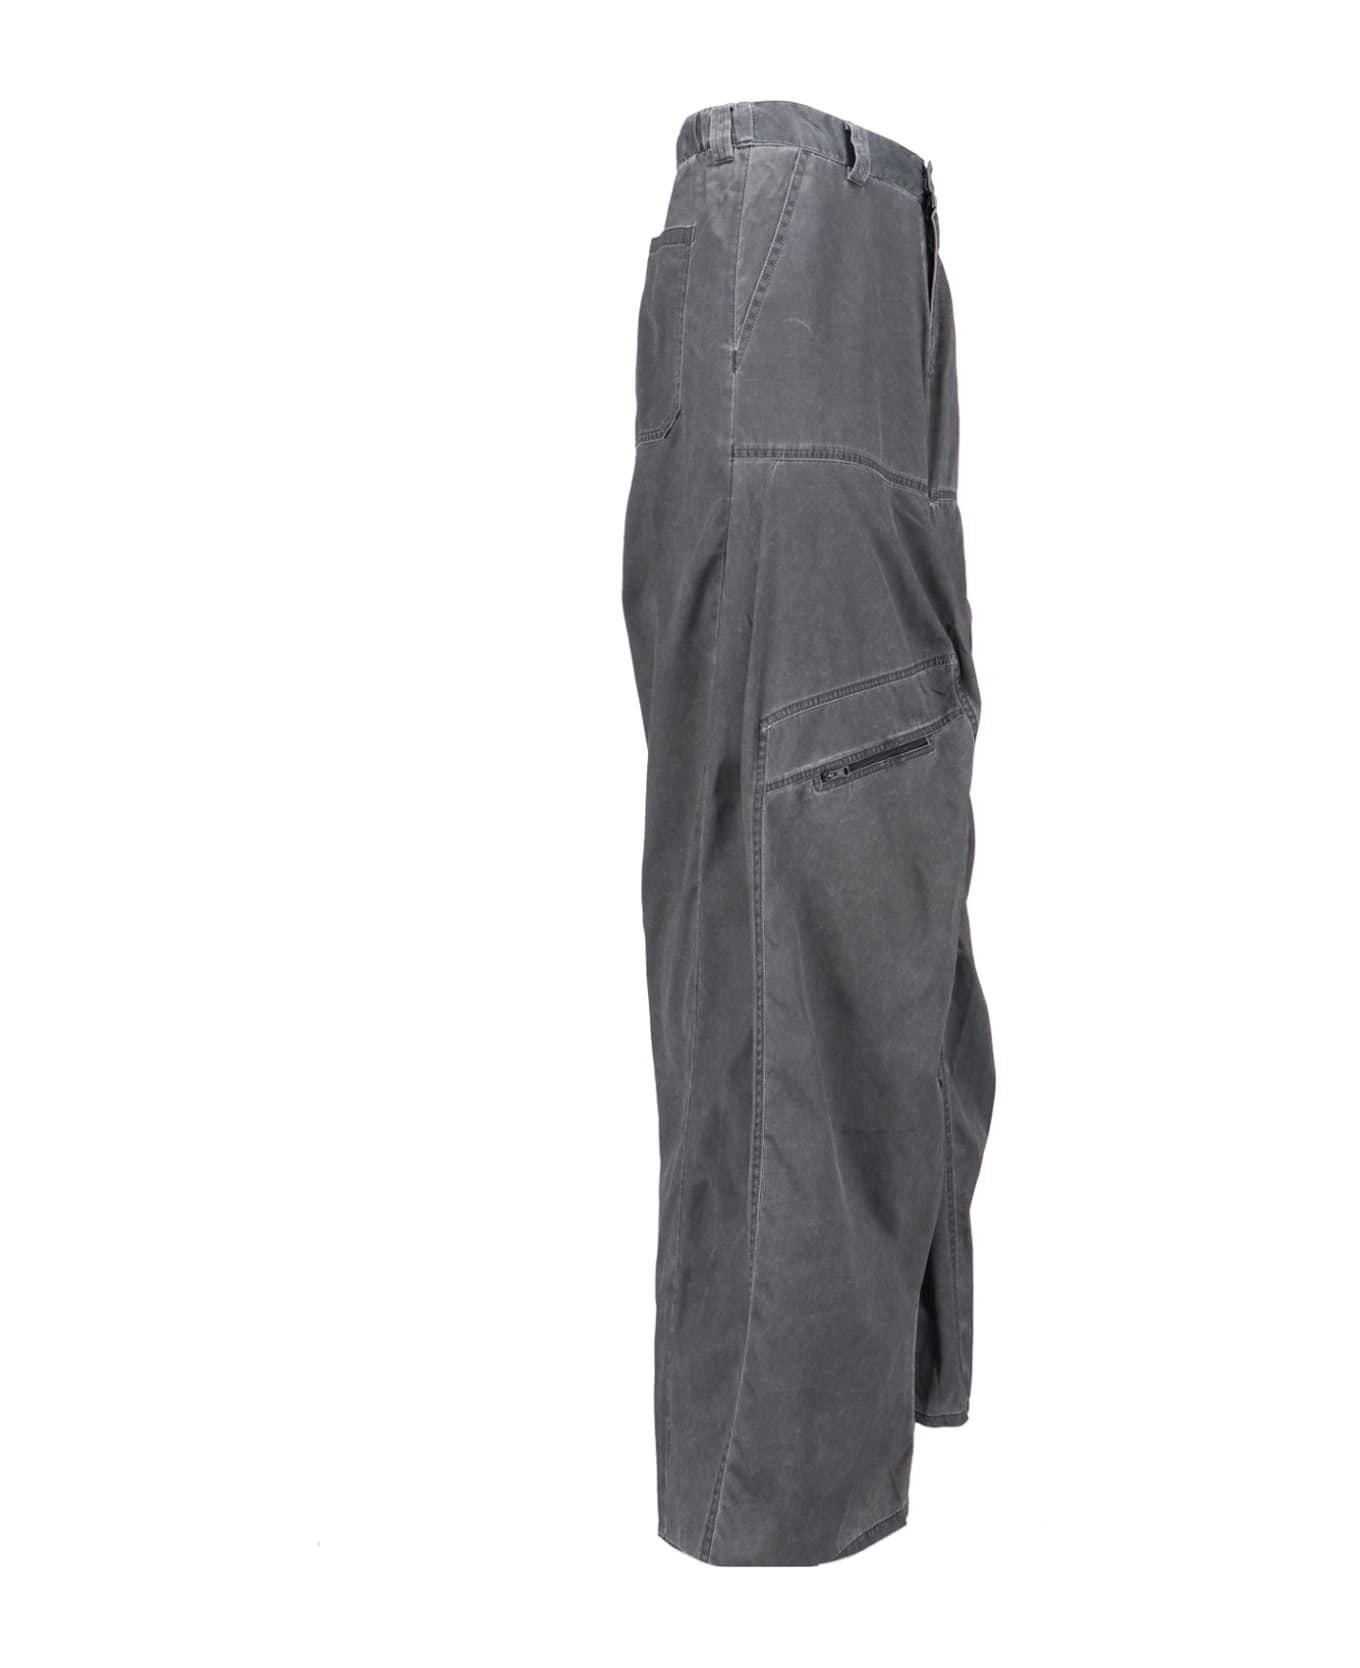 Y/Project Cargo Pants - Black   name:467